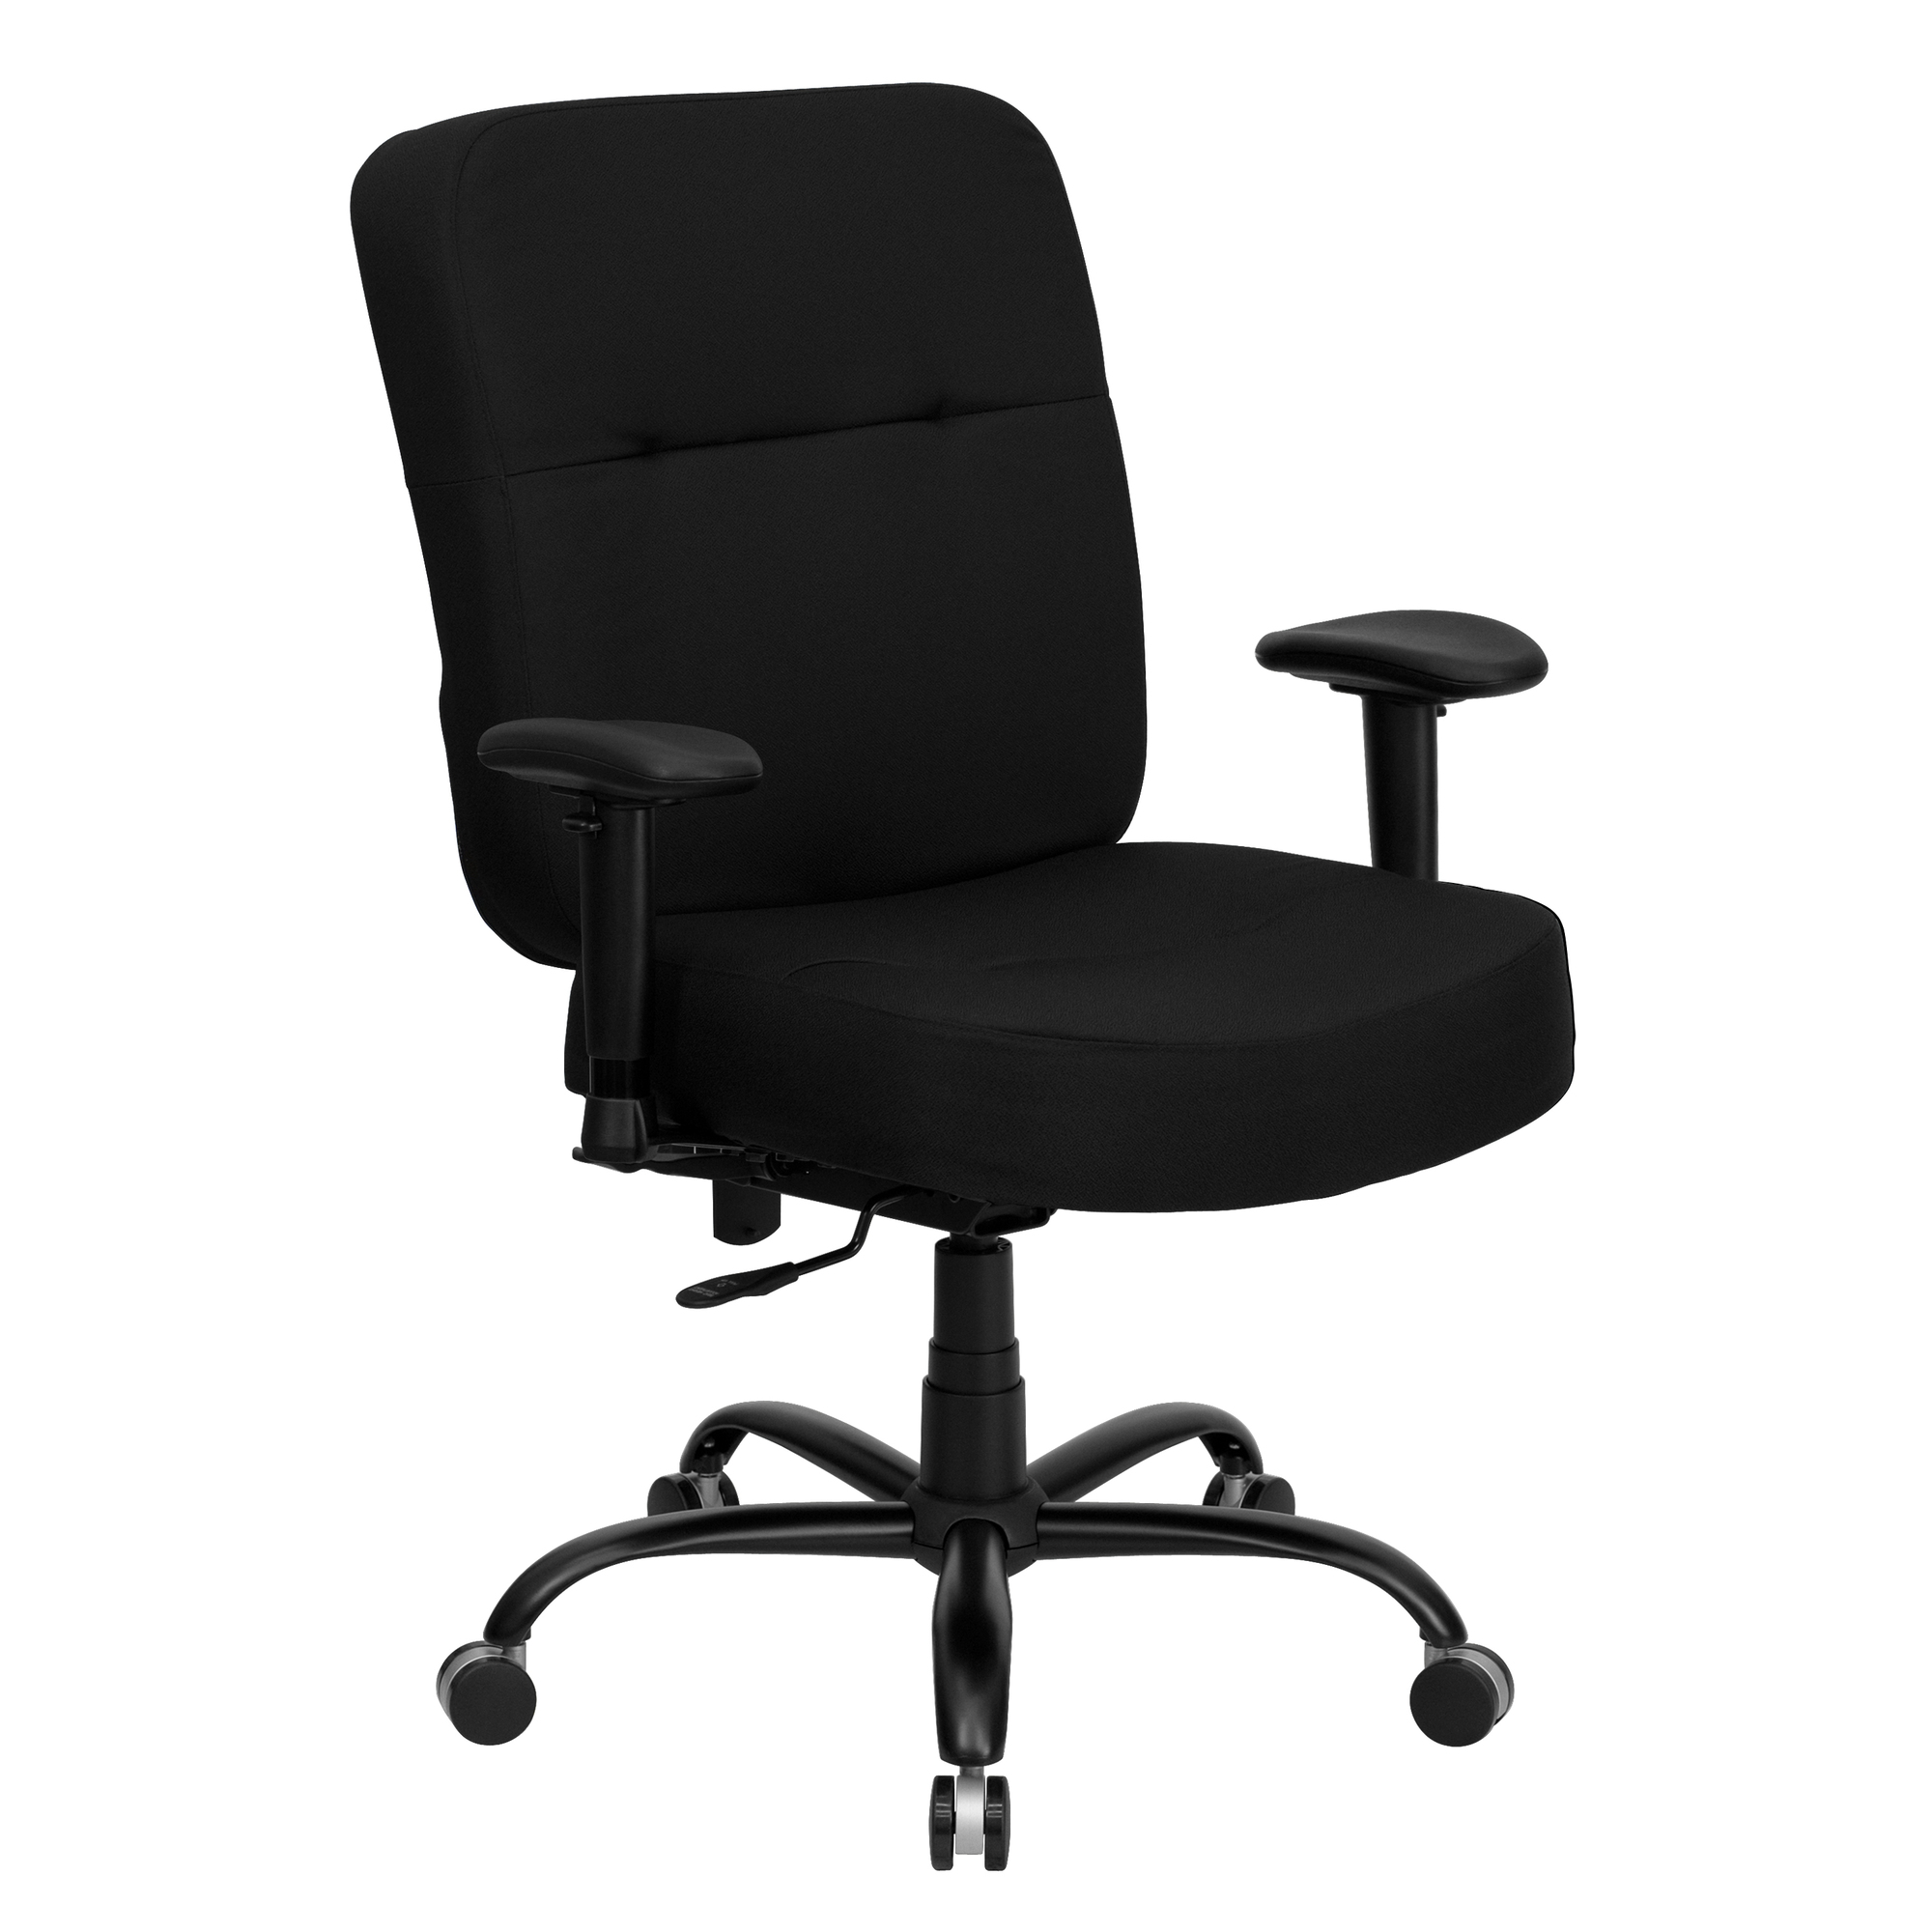 Flash Furniture, 400 lb. Rated High Back Black Fabric Office Chair, Primary Color Black, Included (qty.) 1, Model WL735SYGBKA